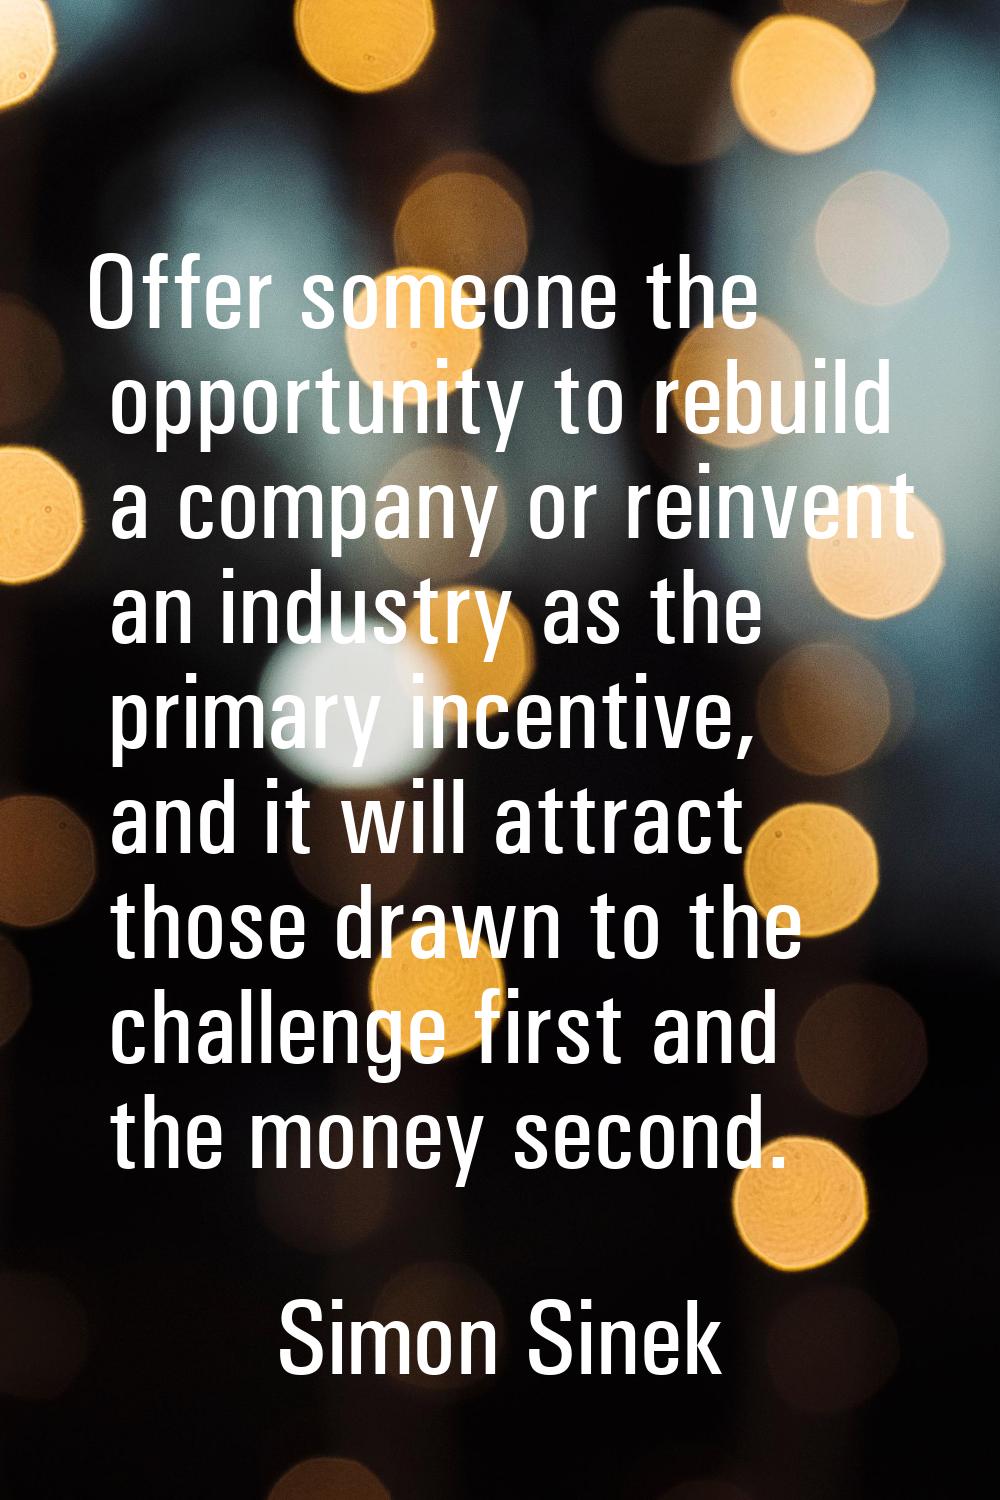 Offer someone the opportunity to rebuild a company or reinvent an industry as the primary incentive